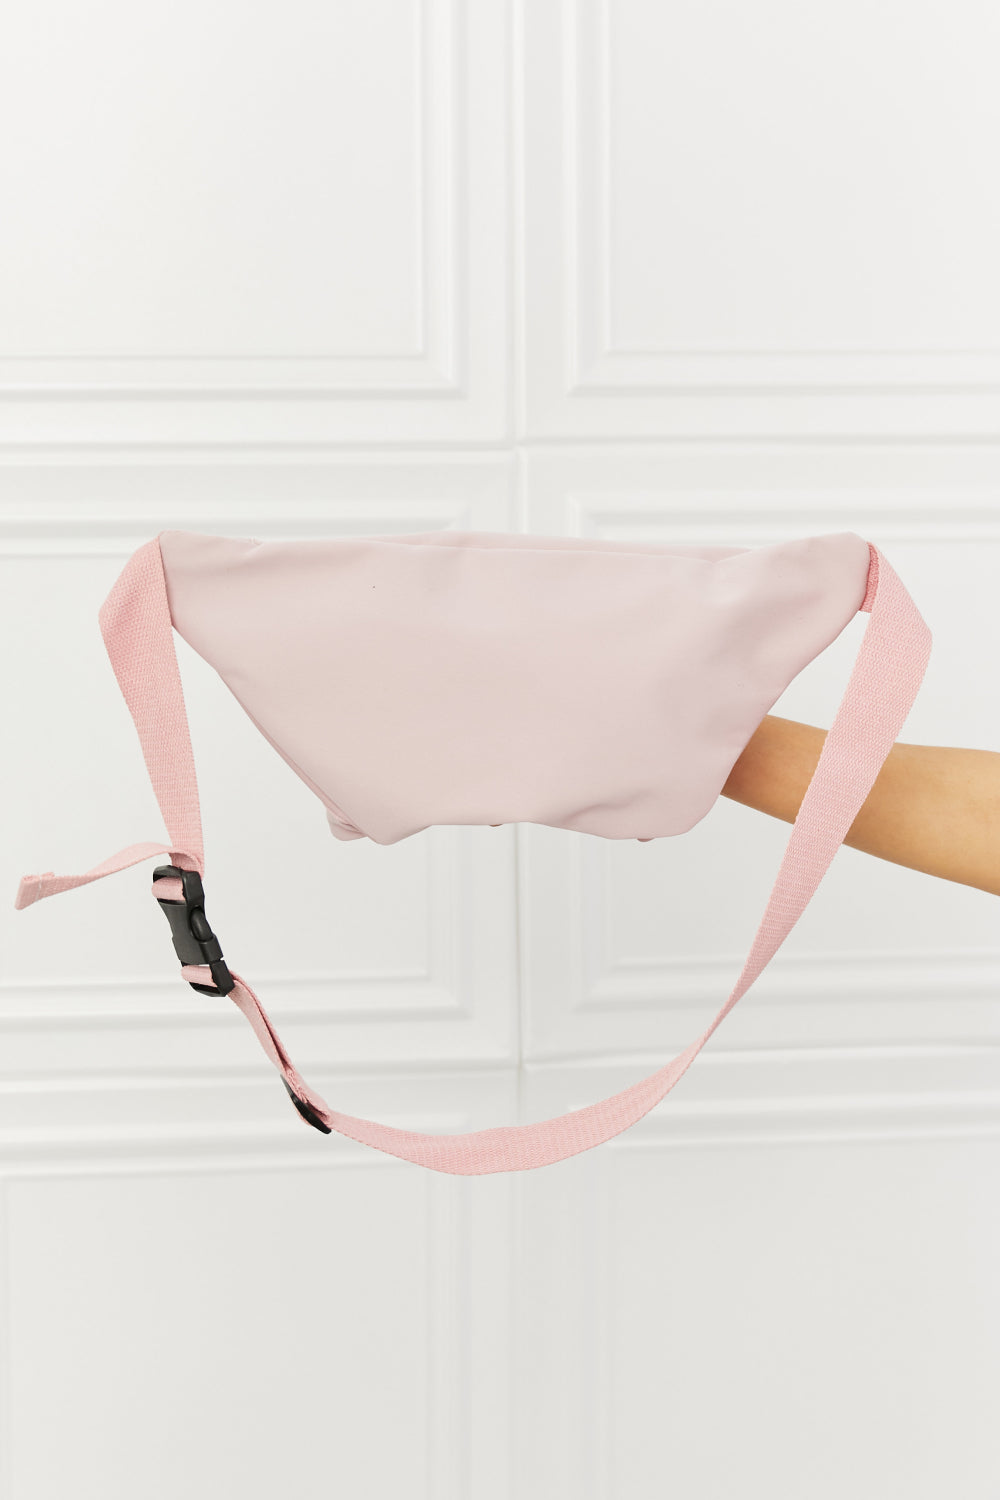 Fame Doing Me Waist Bag in Pink - Online Only